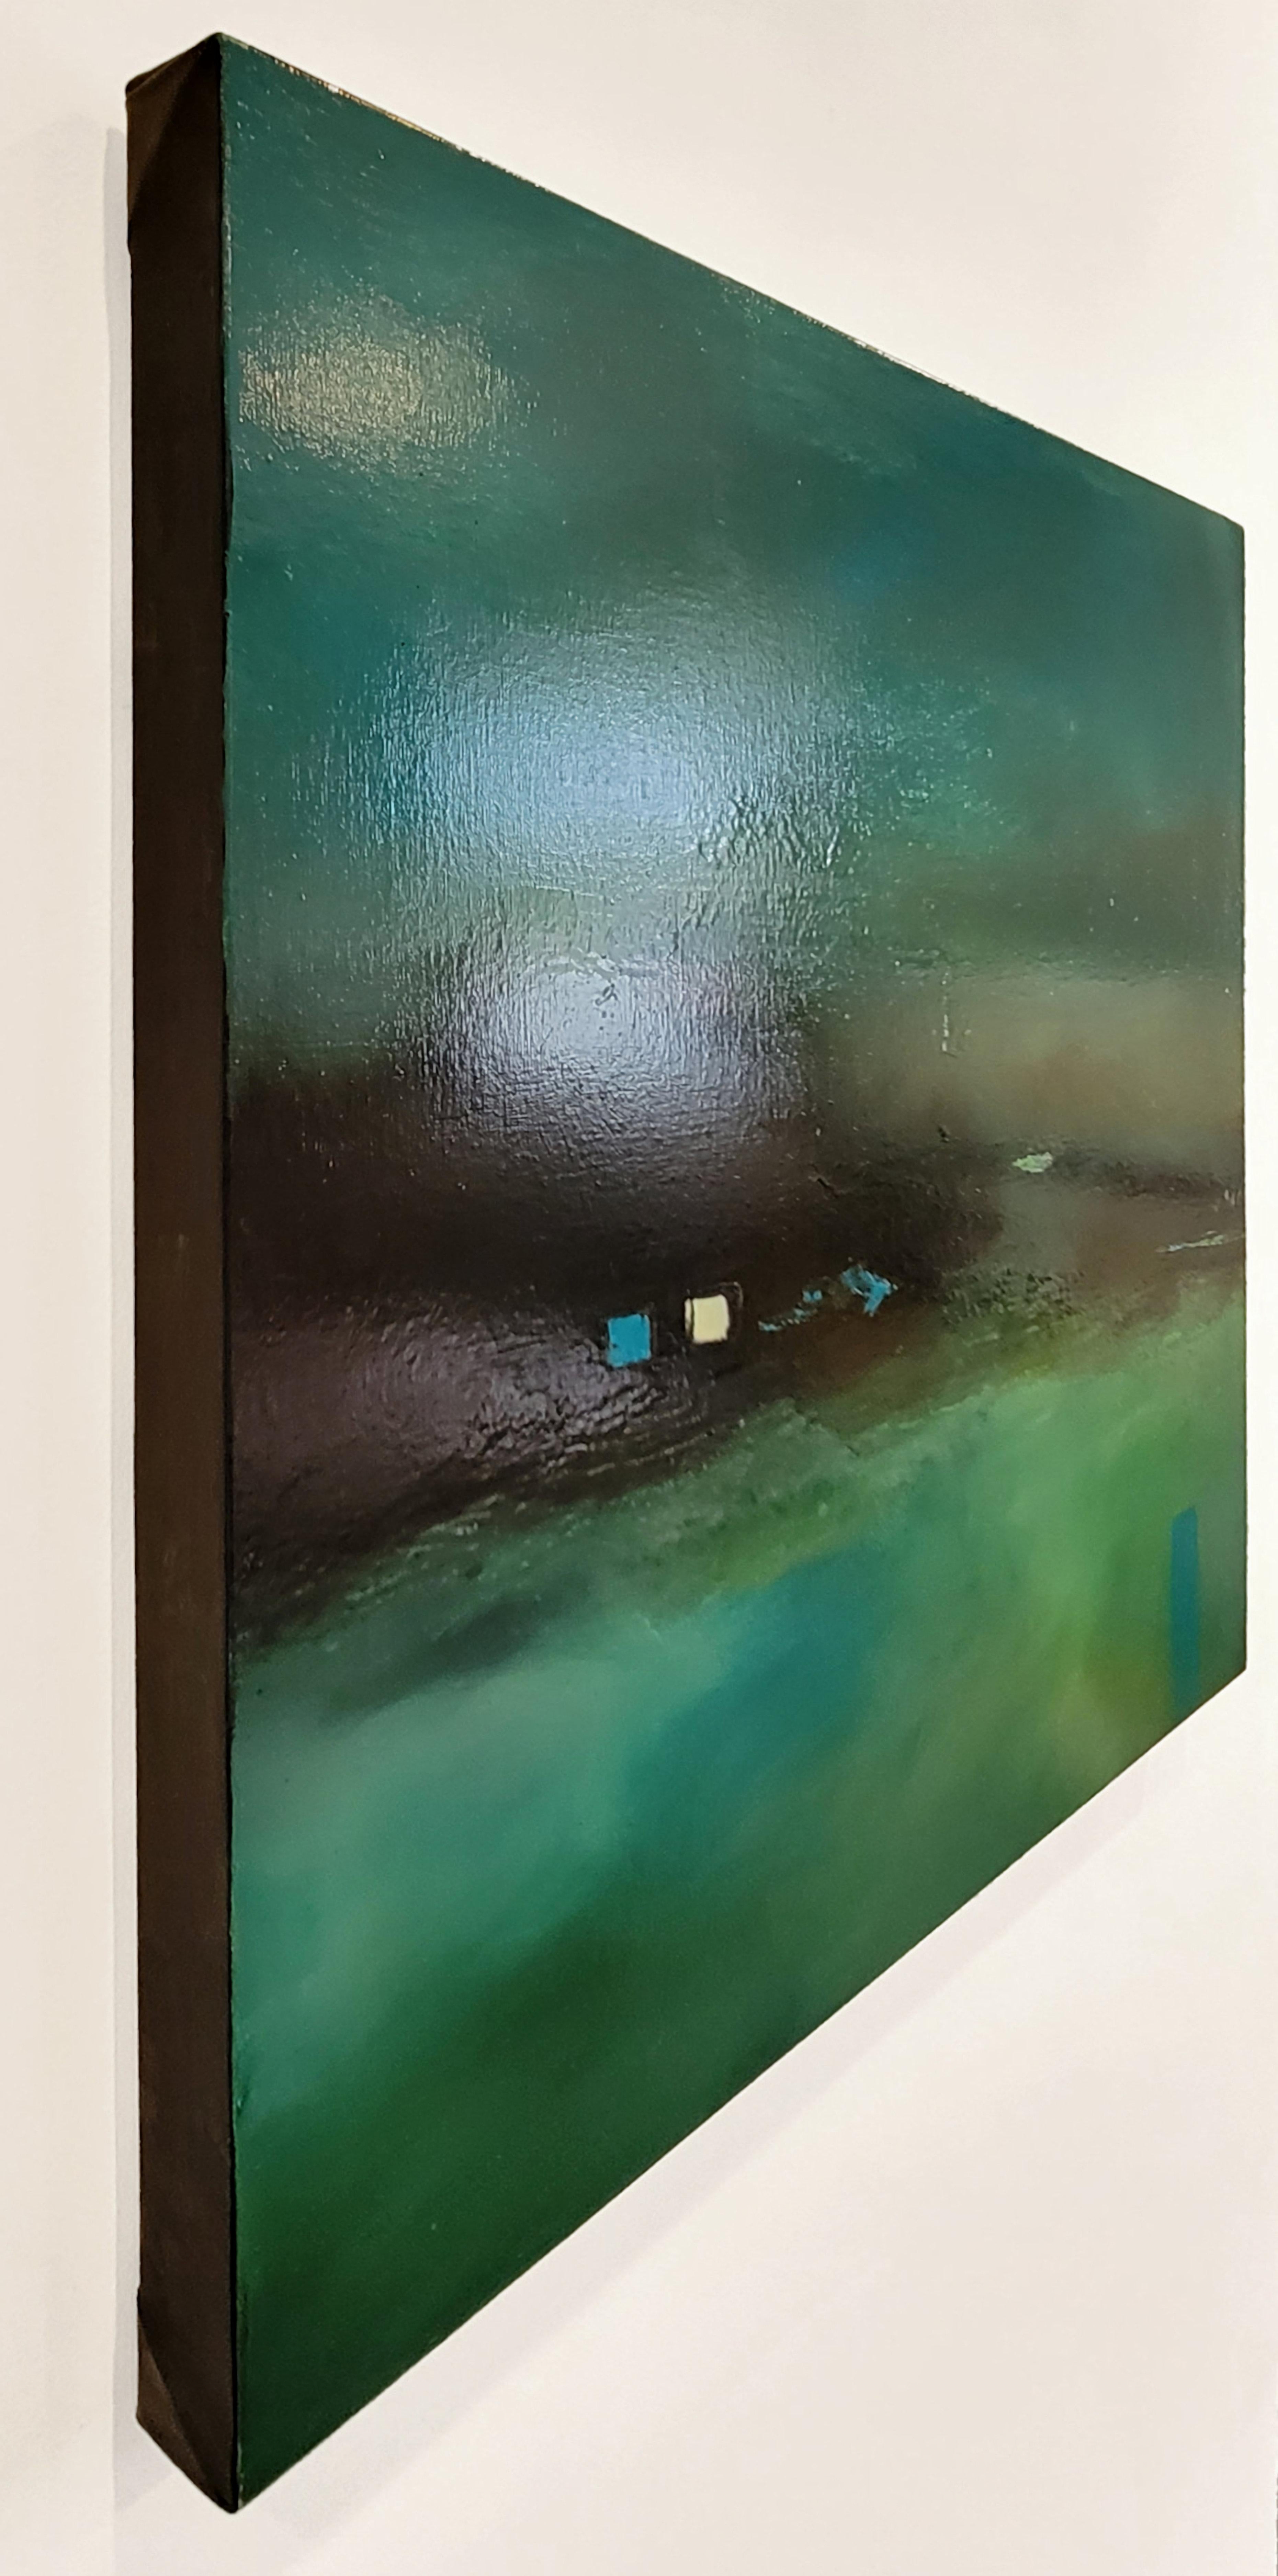 “The Quiet Spot 4” is a 25 x 25 x 1.5 inch oil painting on linen canvas by Anita Loomis that offers a sultry and dreamlike abstract landscape at twilight. With a modern romantic sensibility, the rich aqua blue tones, the composition speaks to stolen